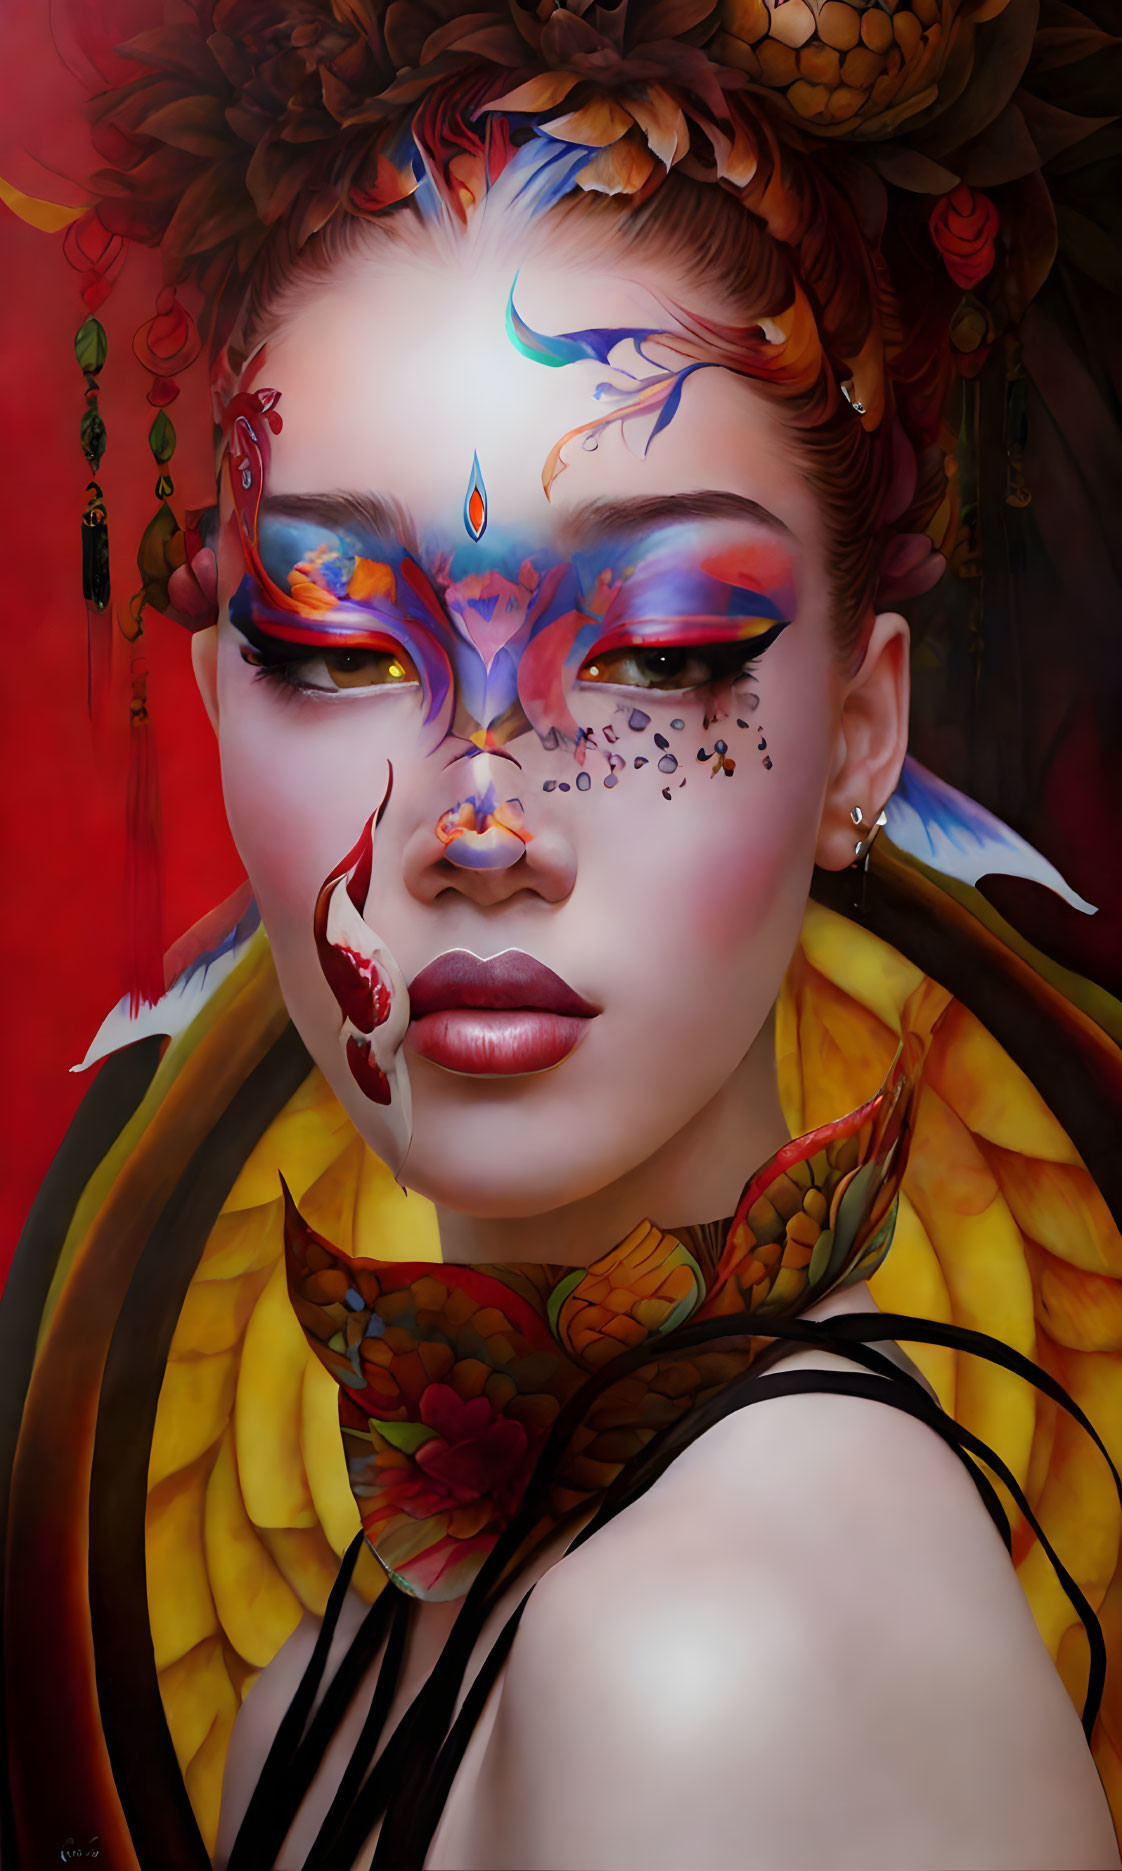 Colorful Butterfly-Inspired Makeup Portrait with Feathers and Florals on Red Background